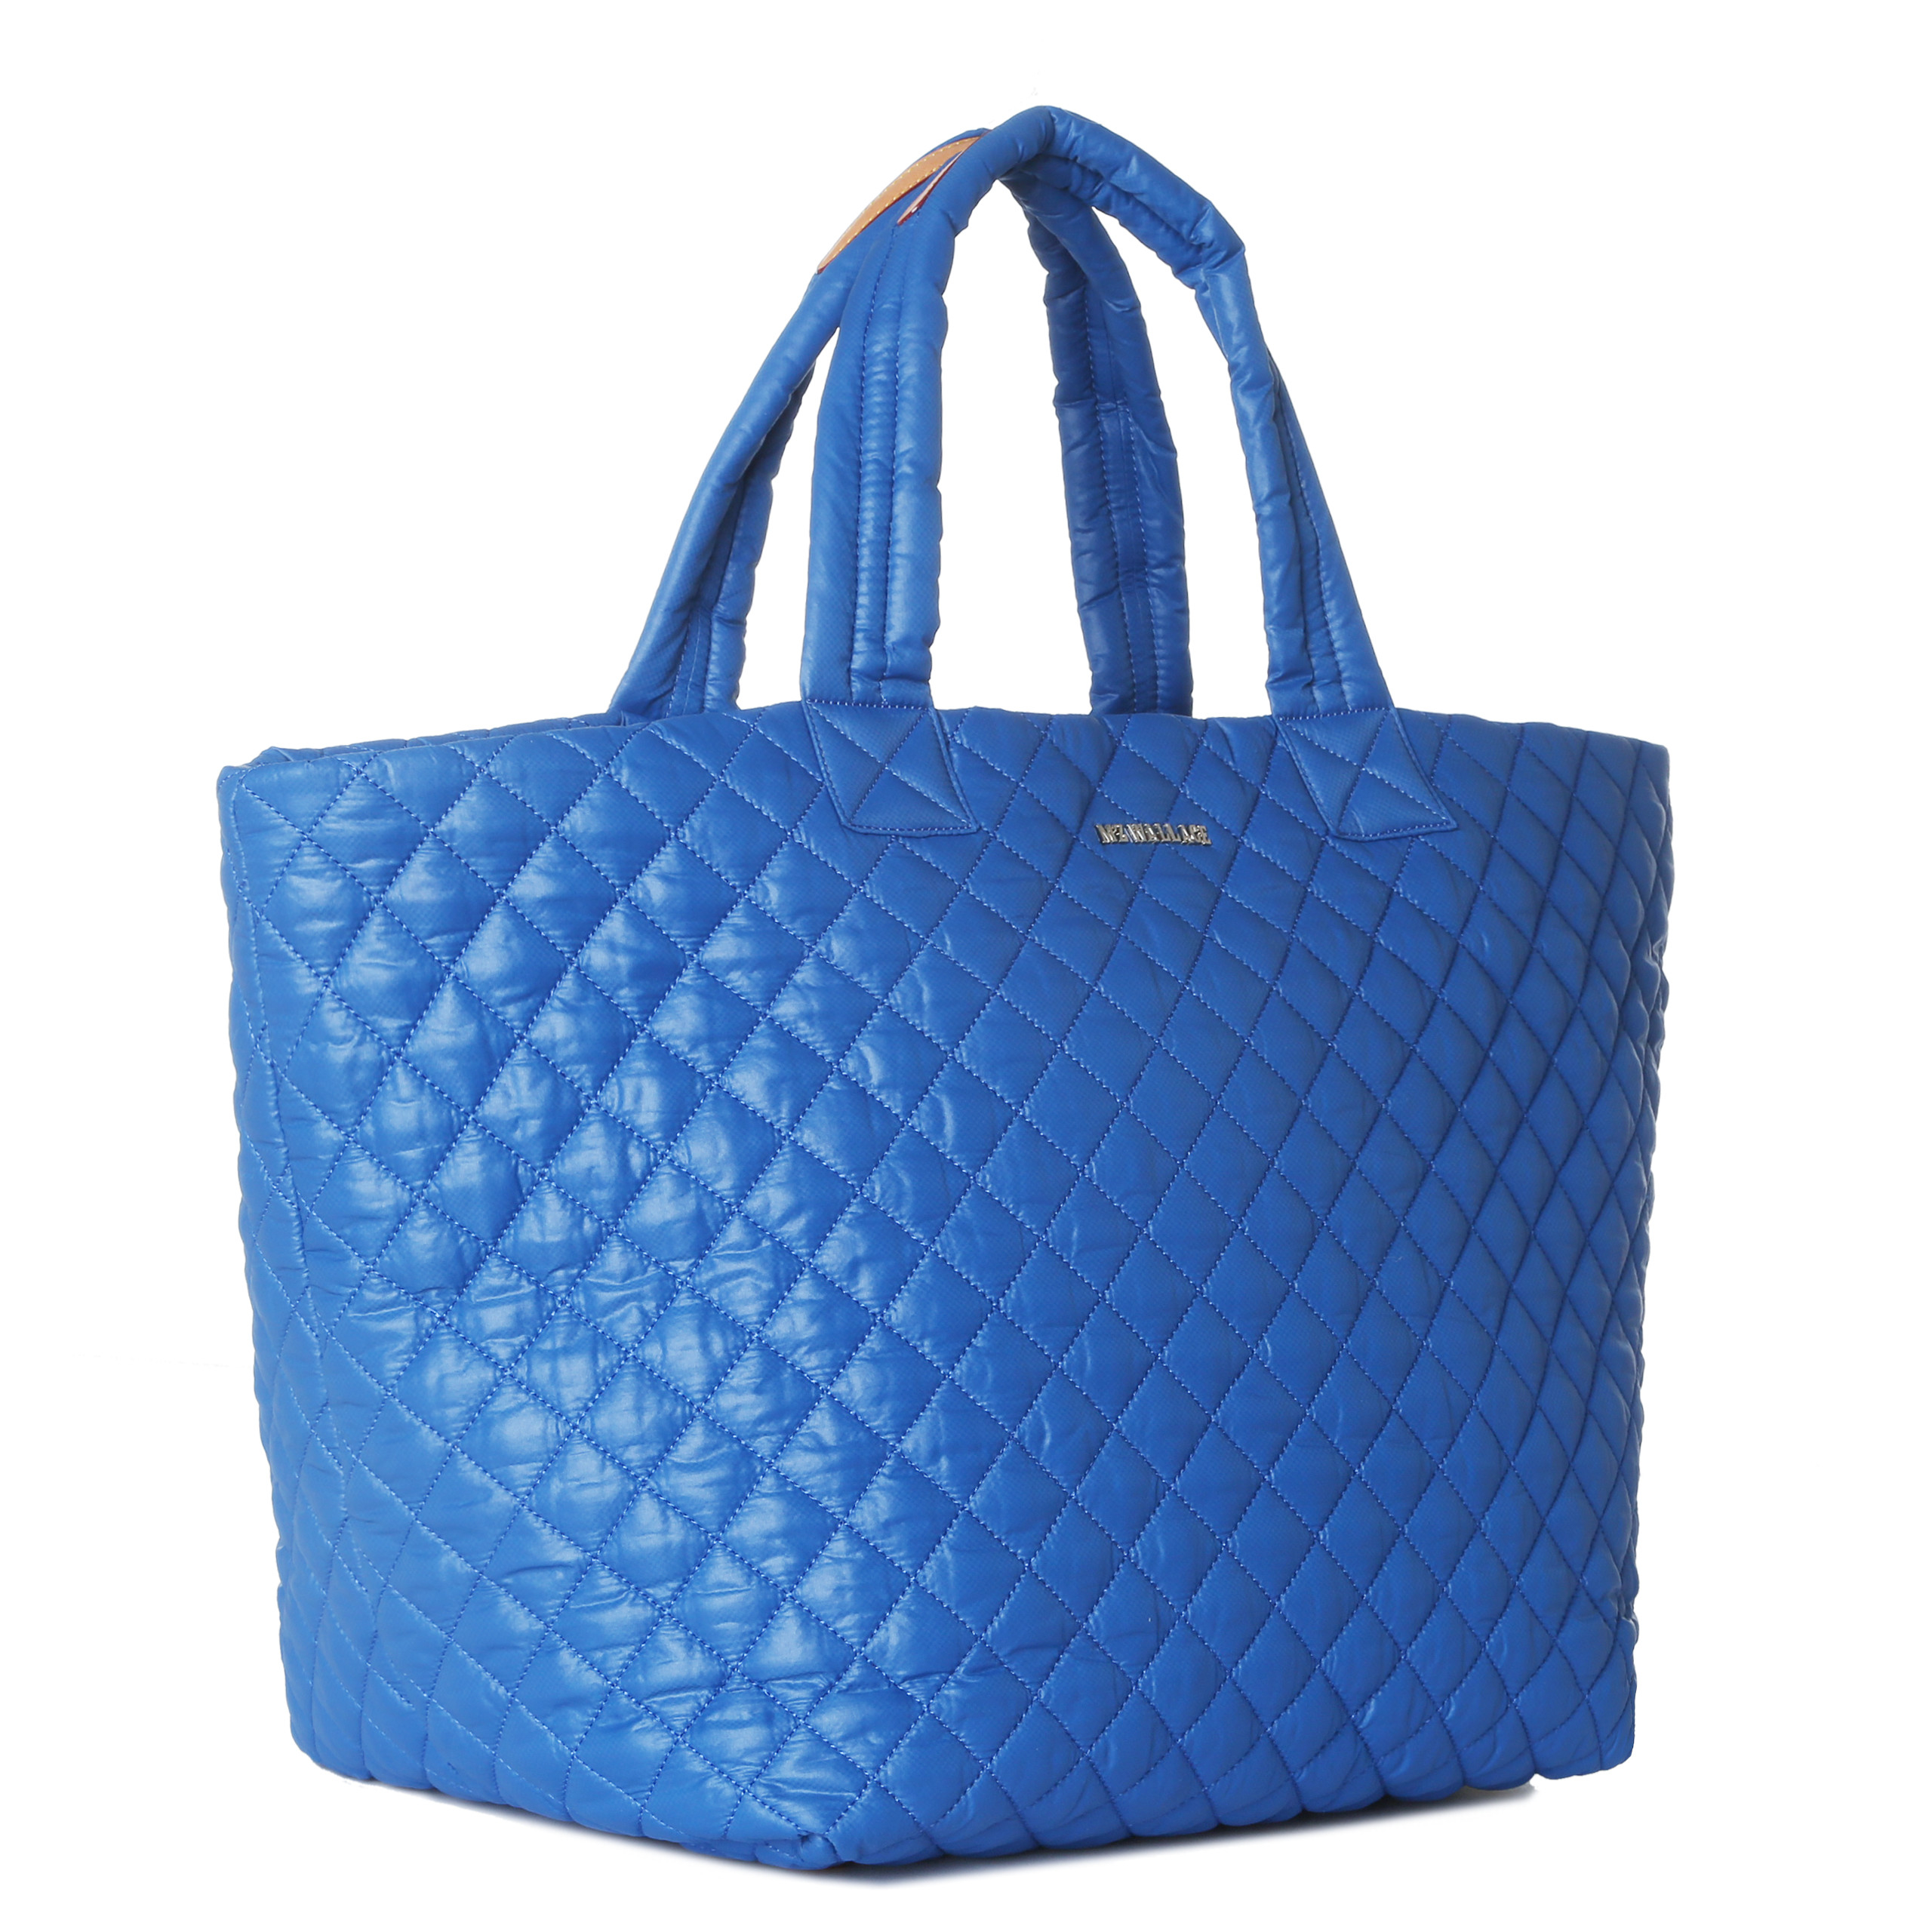 Mz wallace Large Metro Tote Sapphire Quilted Oxford Nylon in Blue | Lyst